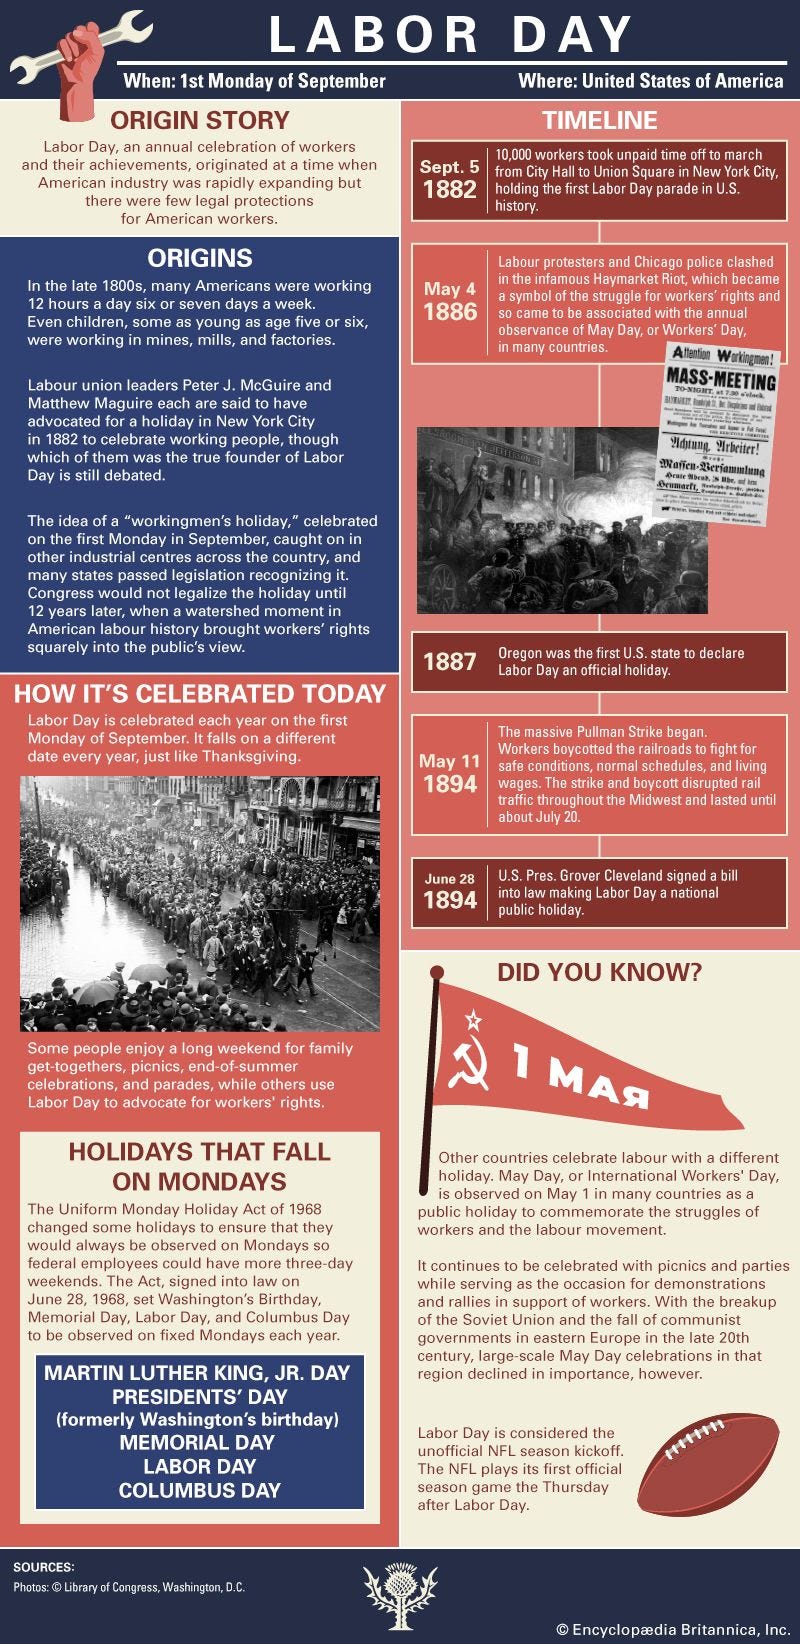 Infographic on the origins and timeline of Labor Day in the United States